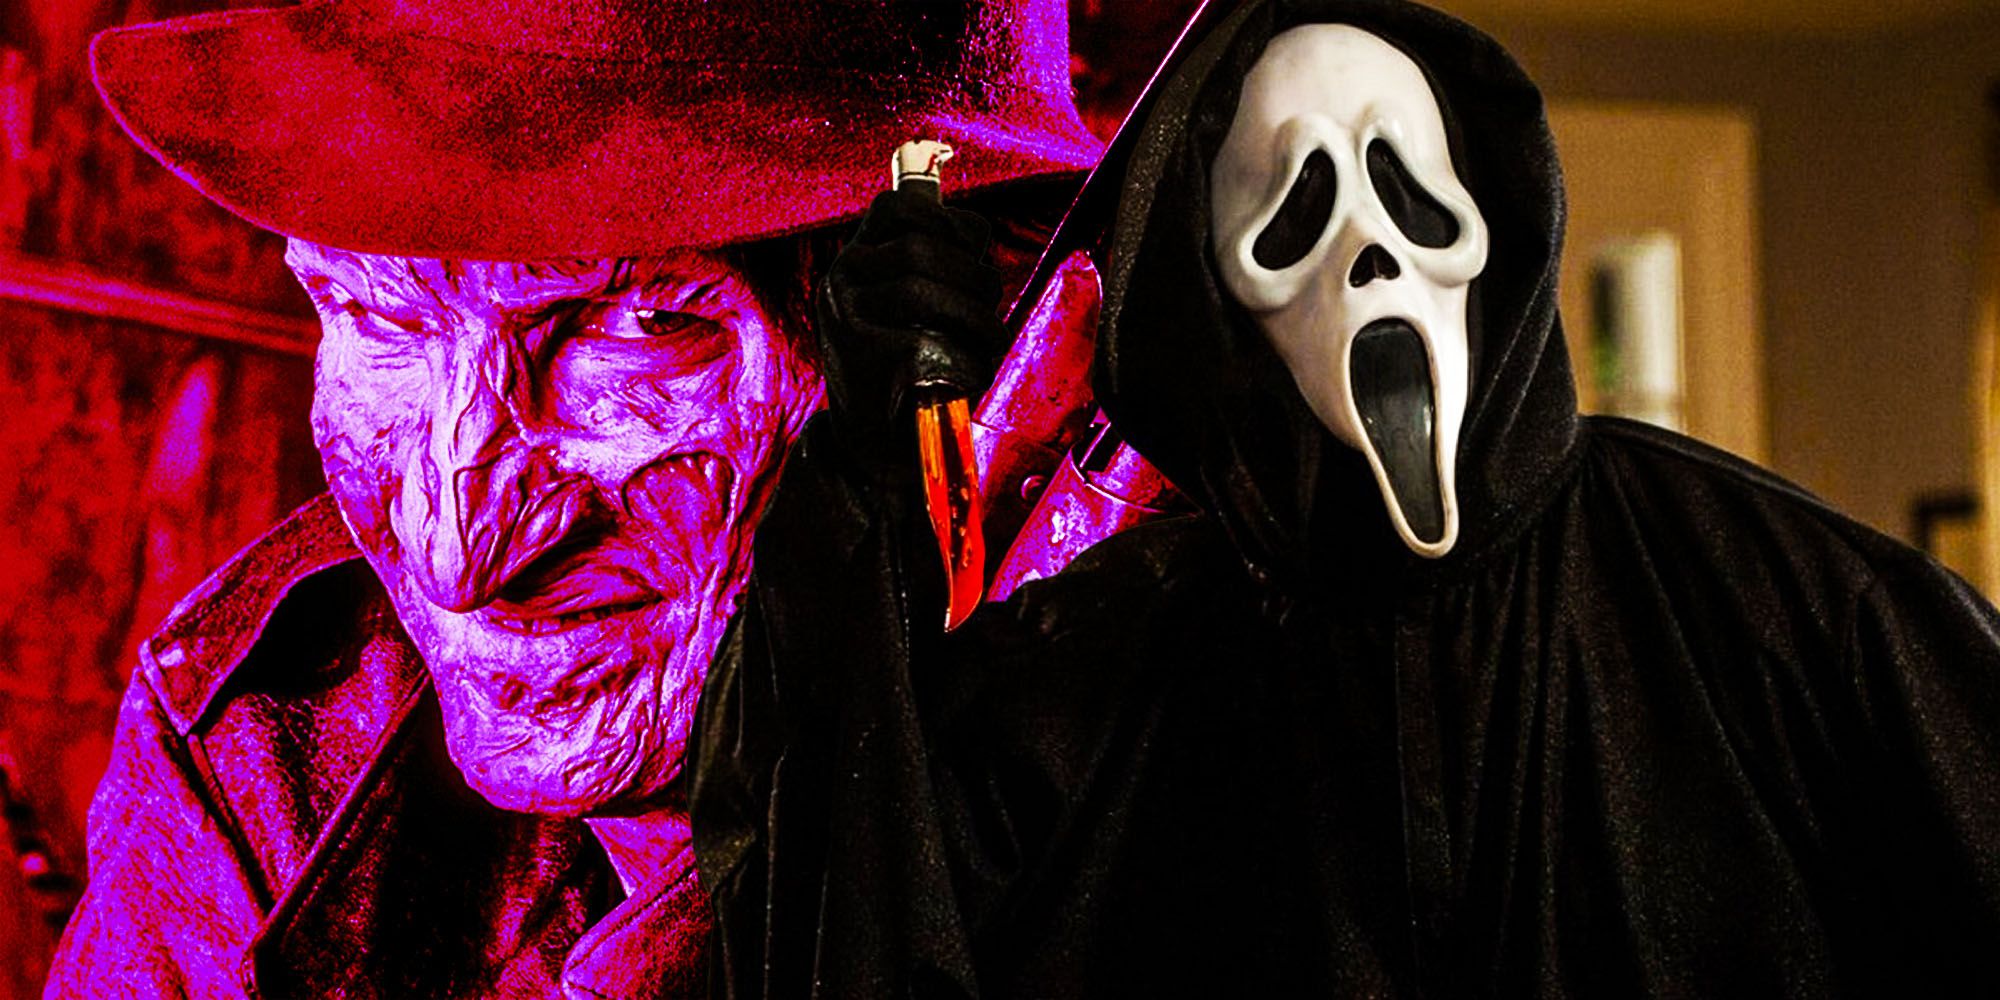 How Scream 4 Referenced Wes Craven’s Unmade Nightmare On Elm Street 4